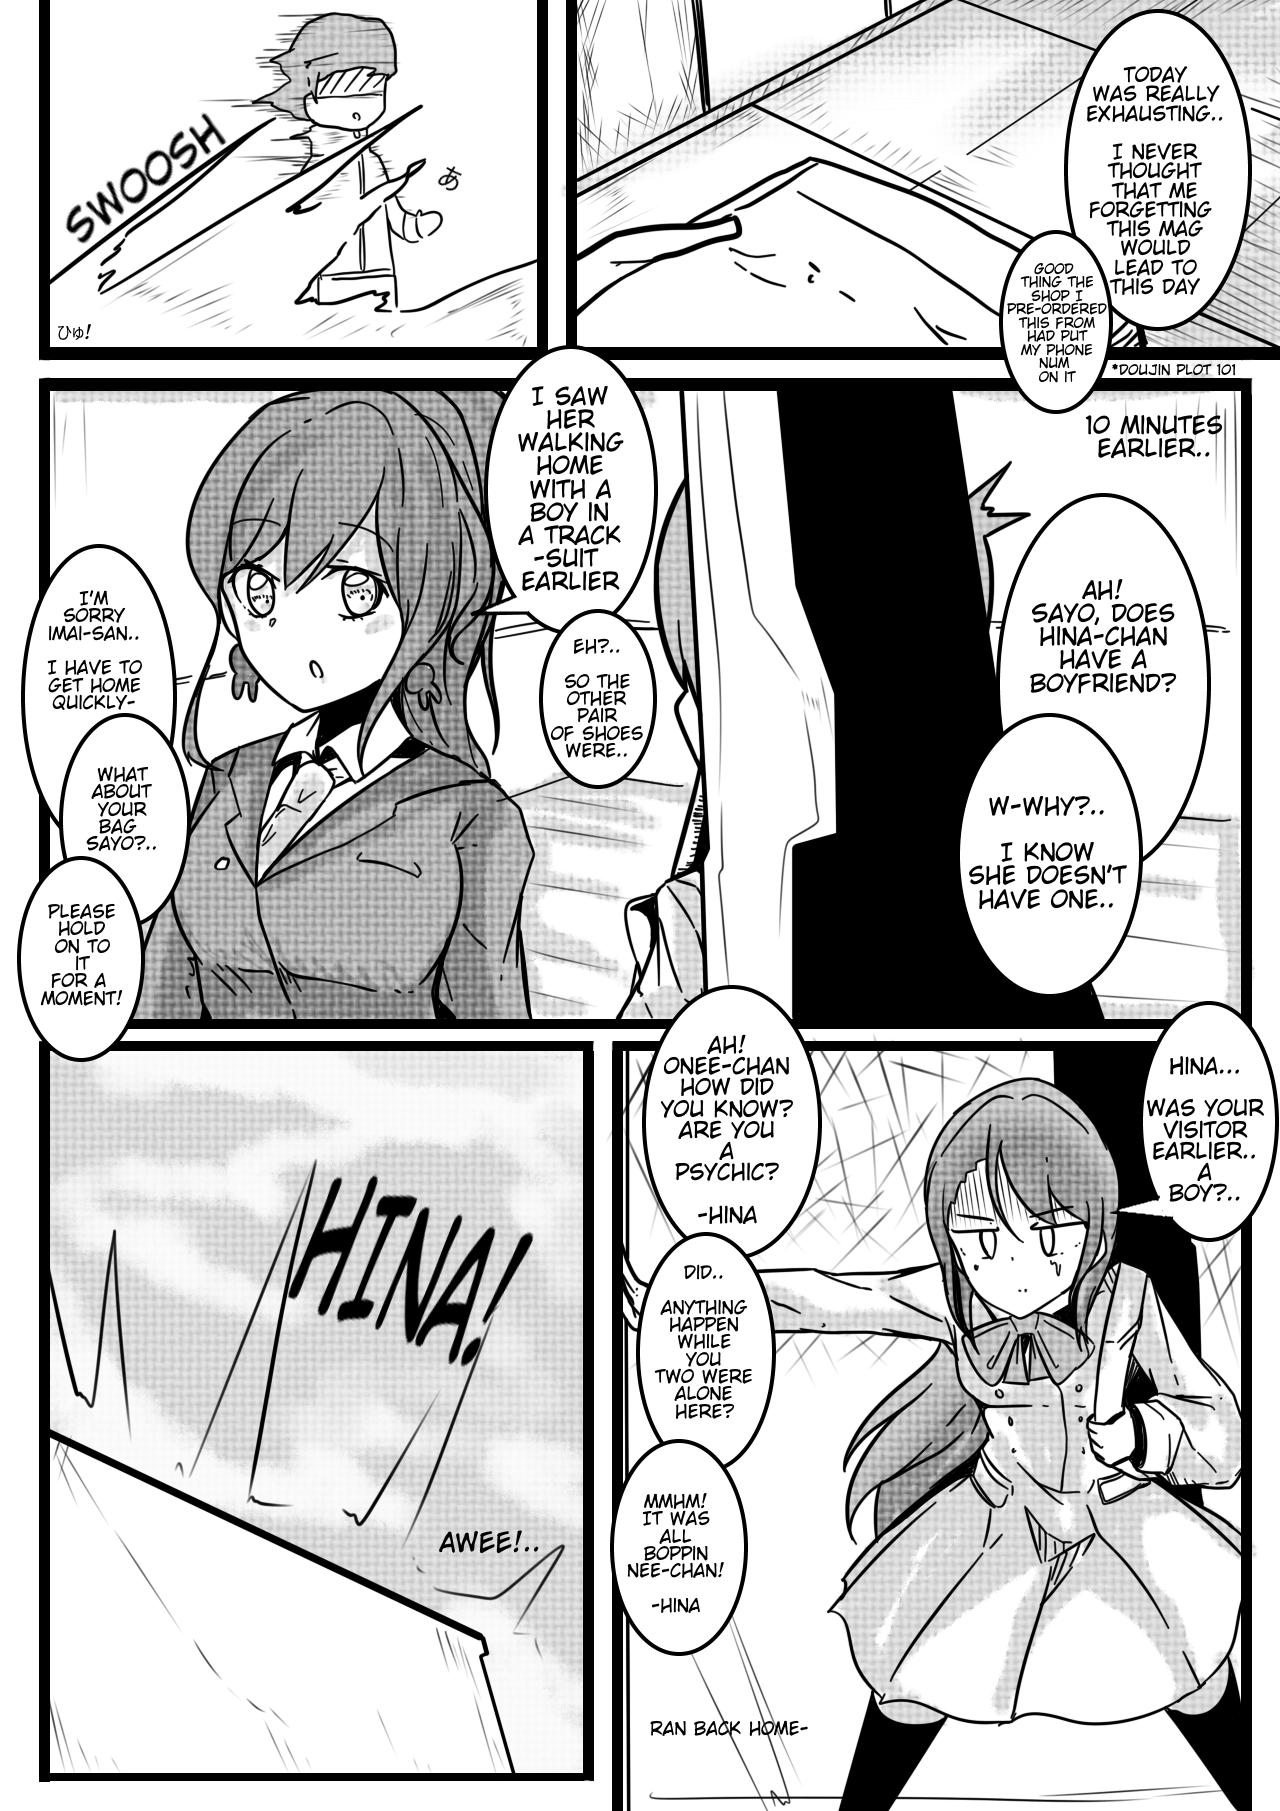 Hungarian Minty Surprise - Bang dream Pussyeating - Page 22